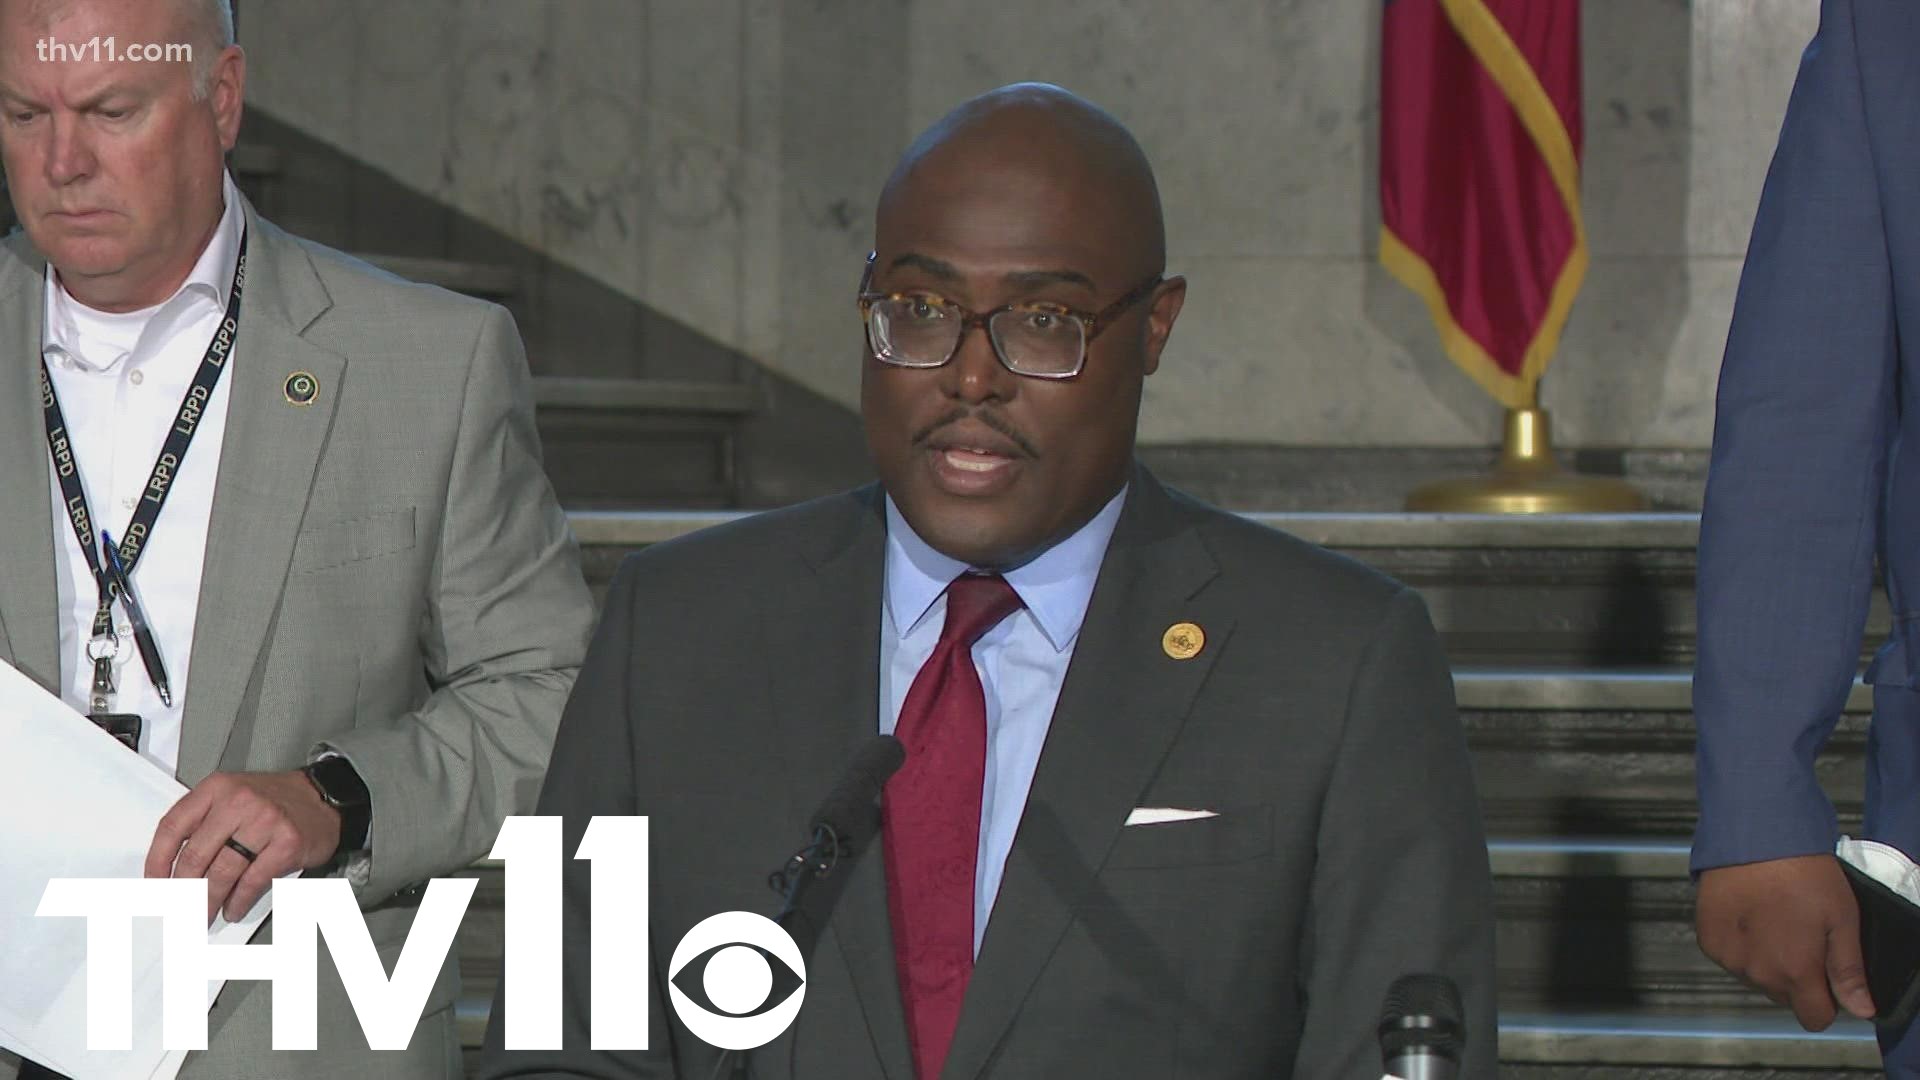 The capital city's streak of violence continues, and Little Rock city leaders are now speaking out about the violence.